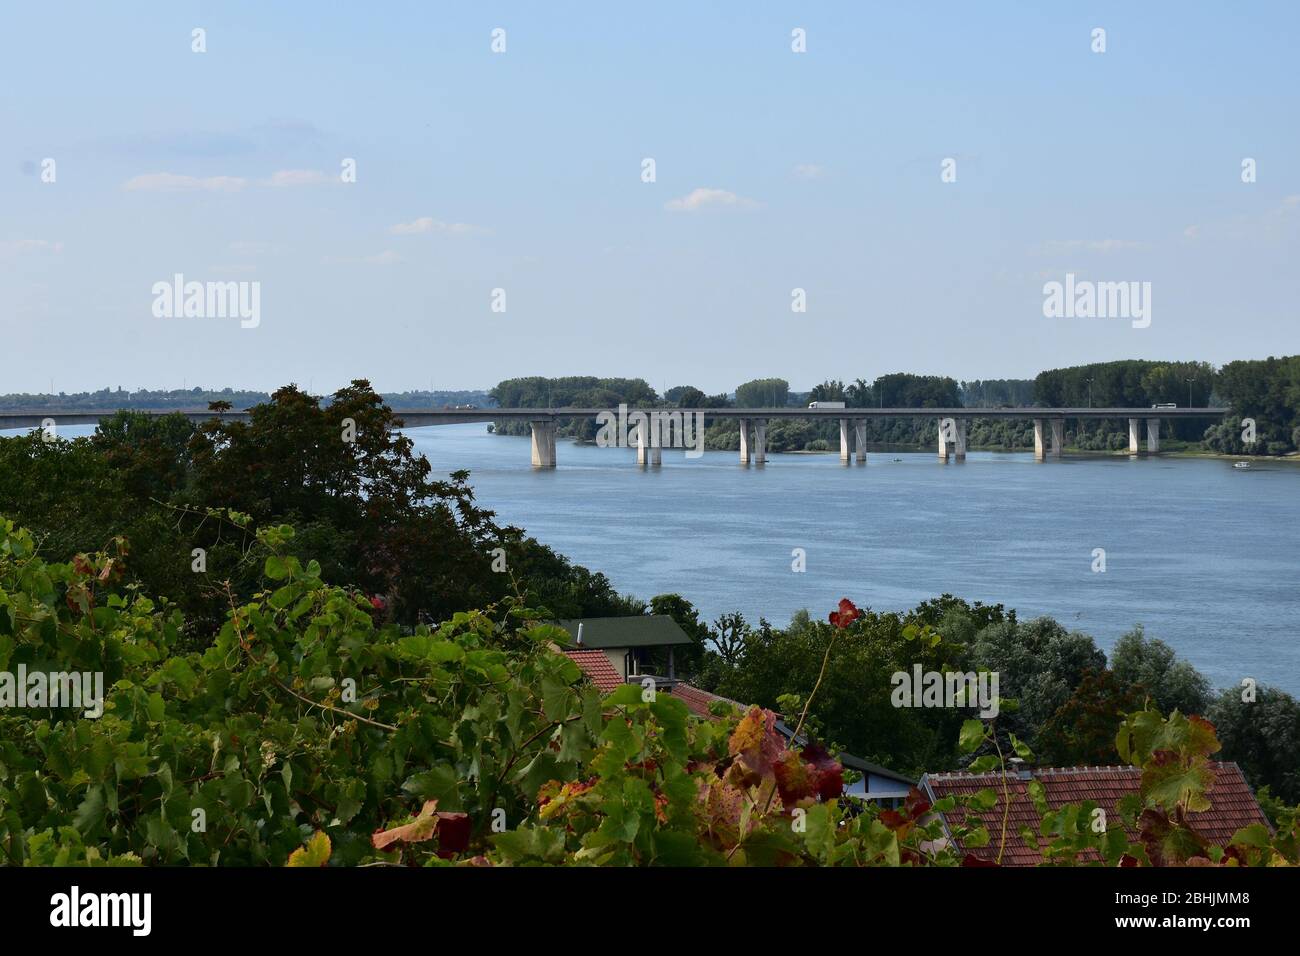 The green bank of the Danube River with several cottages and a bridge across the river Stock Photo